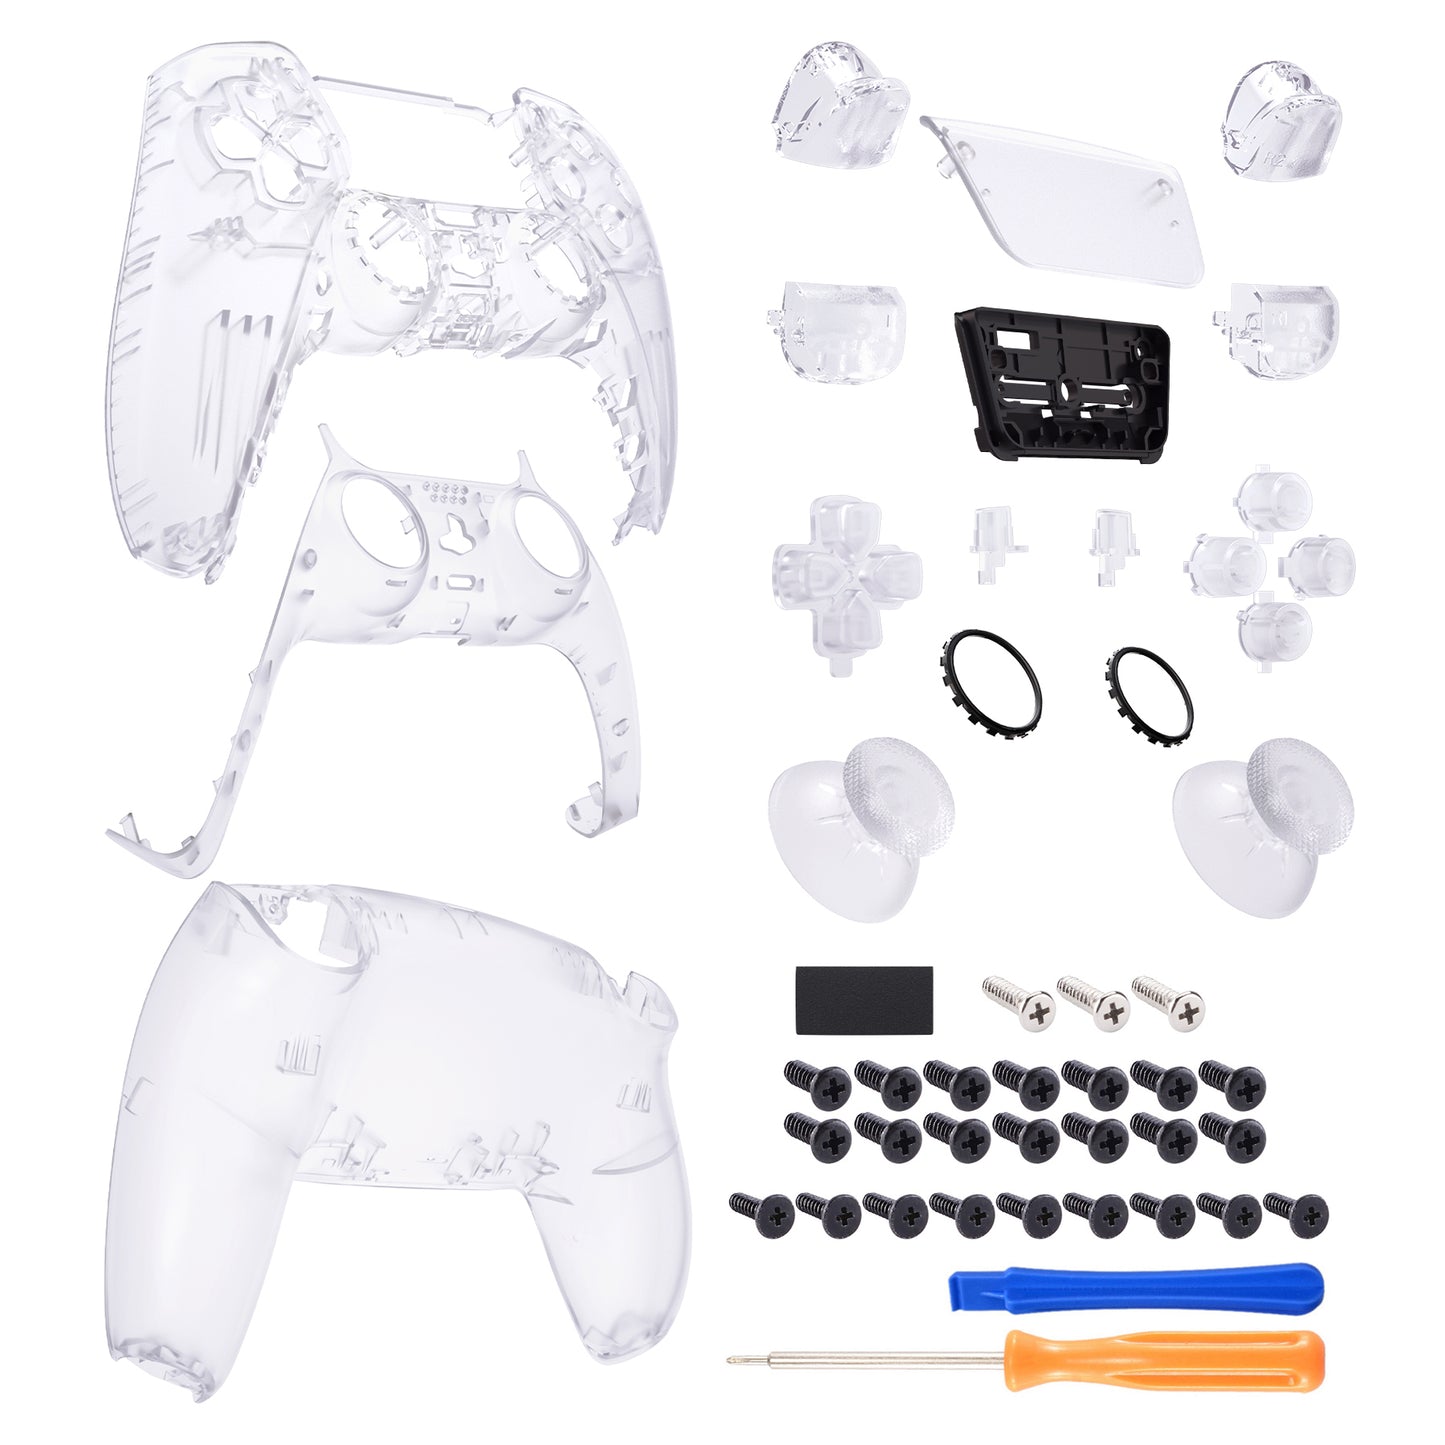 eXtremeRate Replacement Full Set Shells with Buttons Compatible with PS5 Controller BDM-010/020 - Clear eXtremeRate